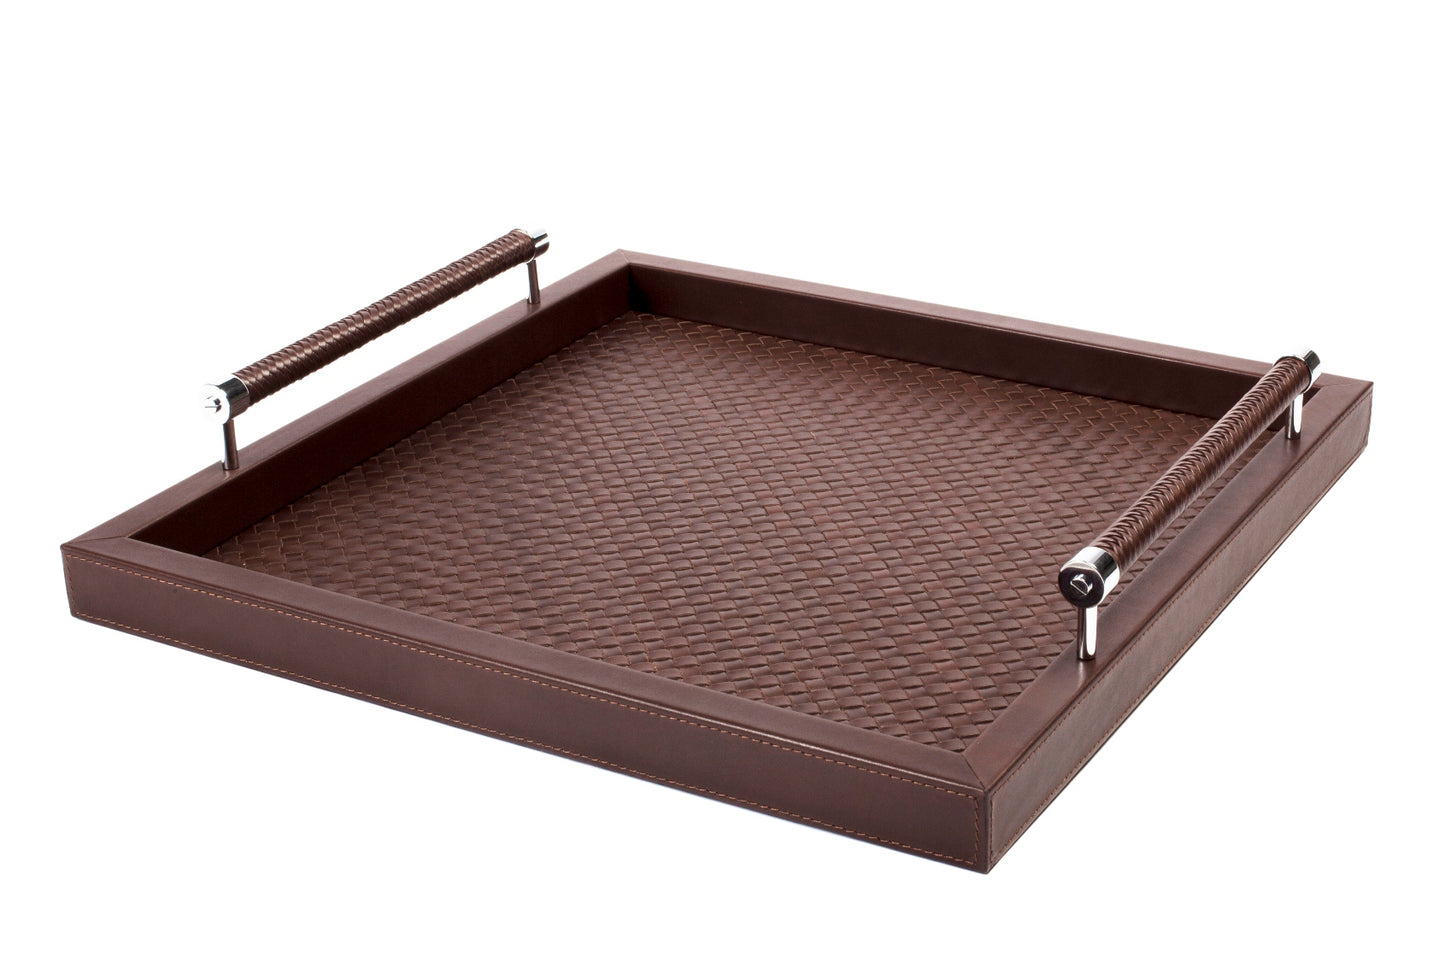 Diana Handwoven Leather Tray with Leather Handles Square